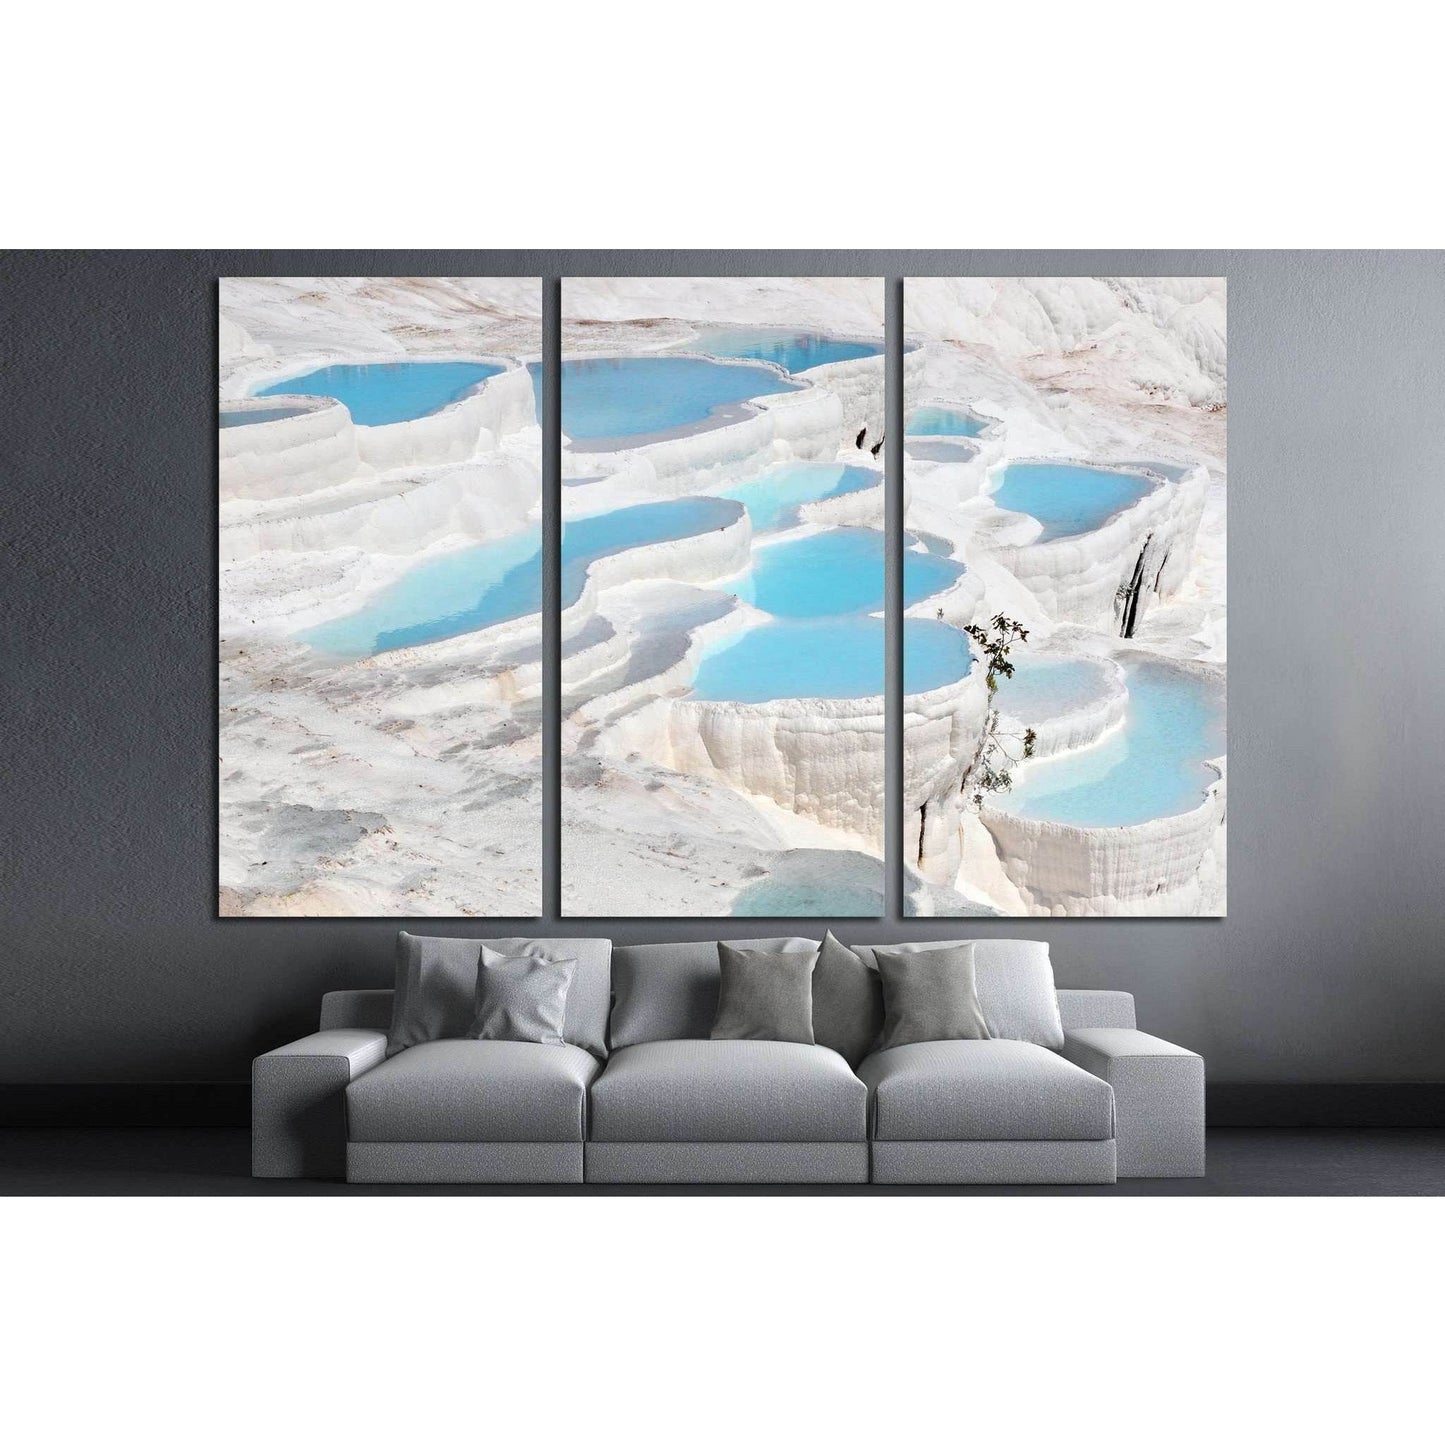 Cascading Blue Pools of Pamukkale Print for Nature-Inspired DecorThis canvas print features the unique natural terraces of Pamukkale in Turkey, known for their mineral-rich thermal waters and striking white limestone. The cascading blue pools create a ser